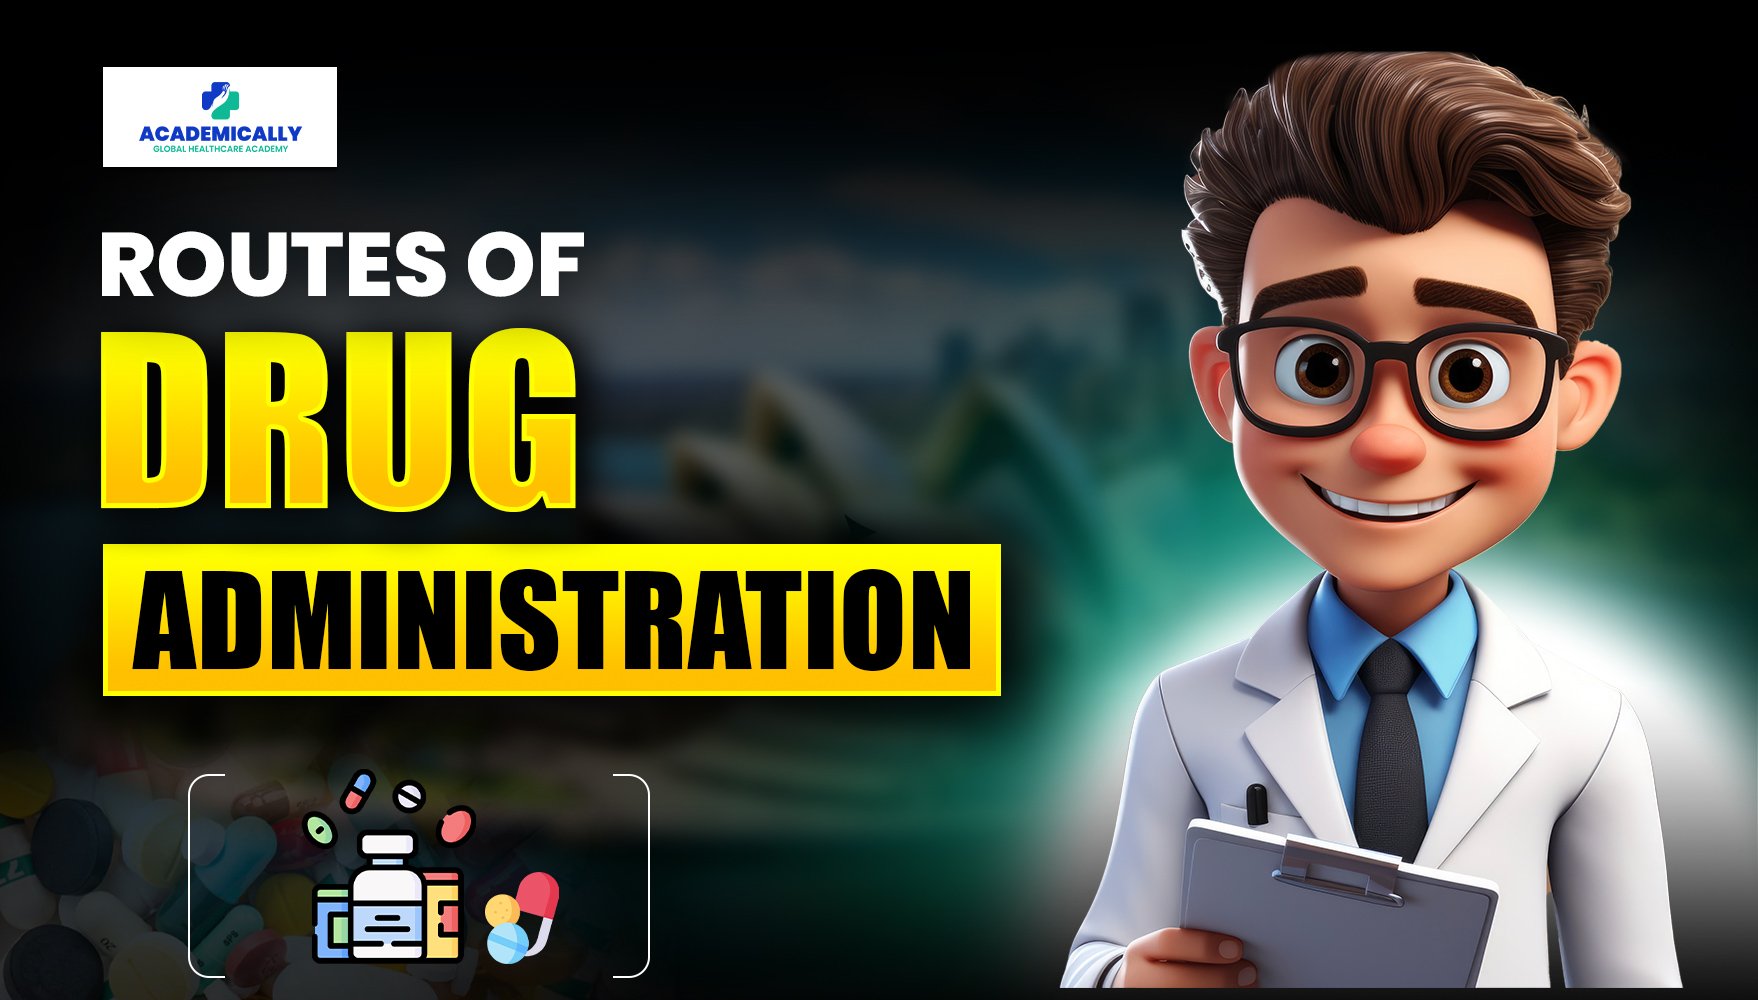 Routes of Drug Administration